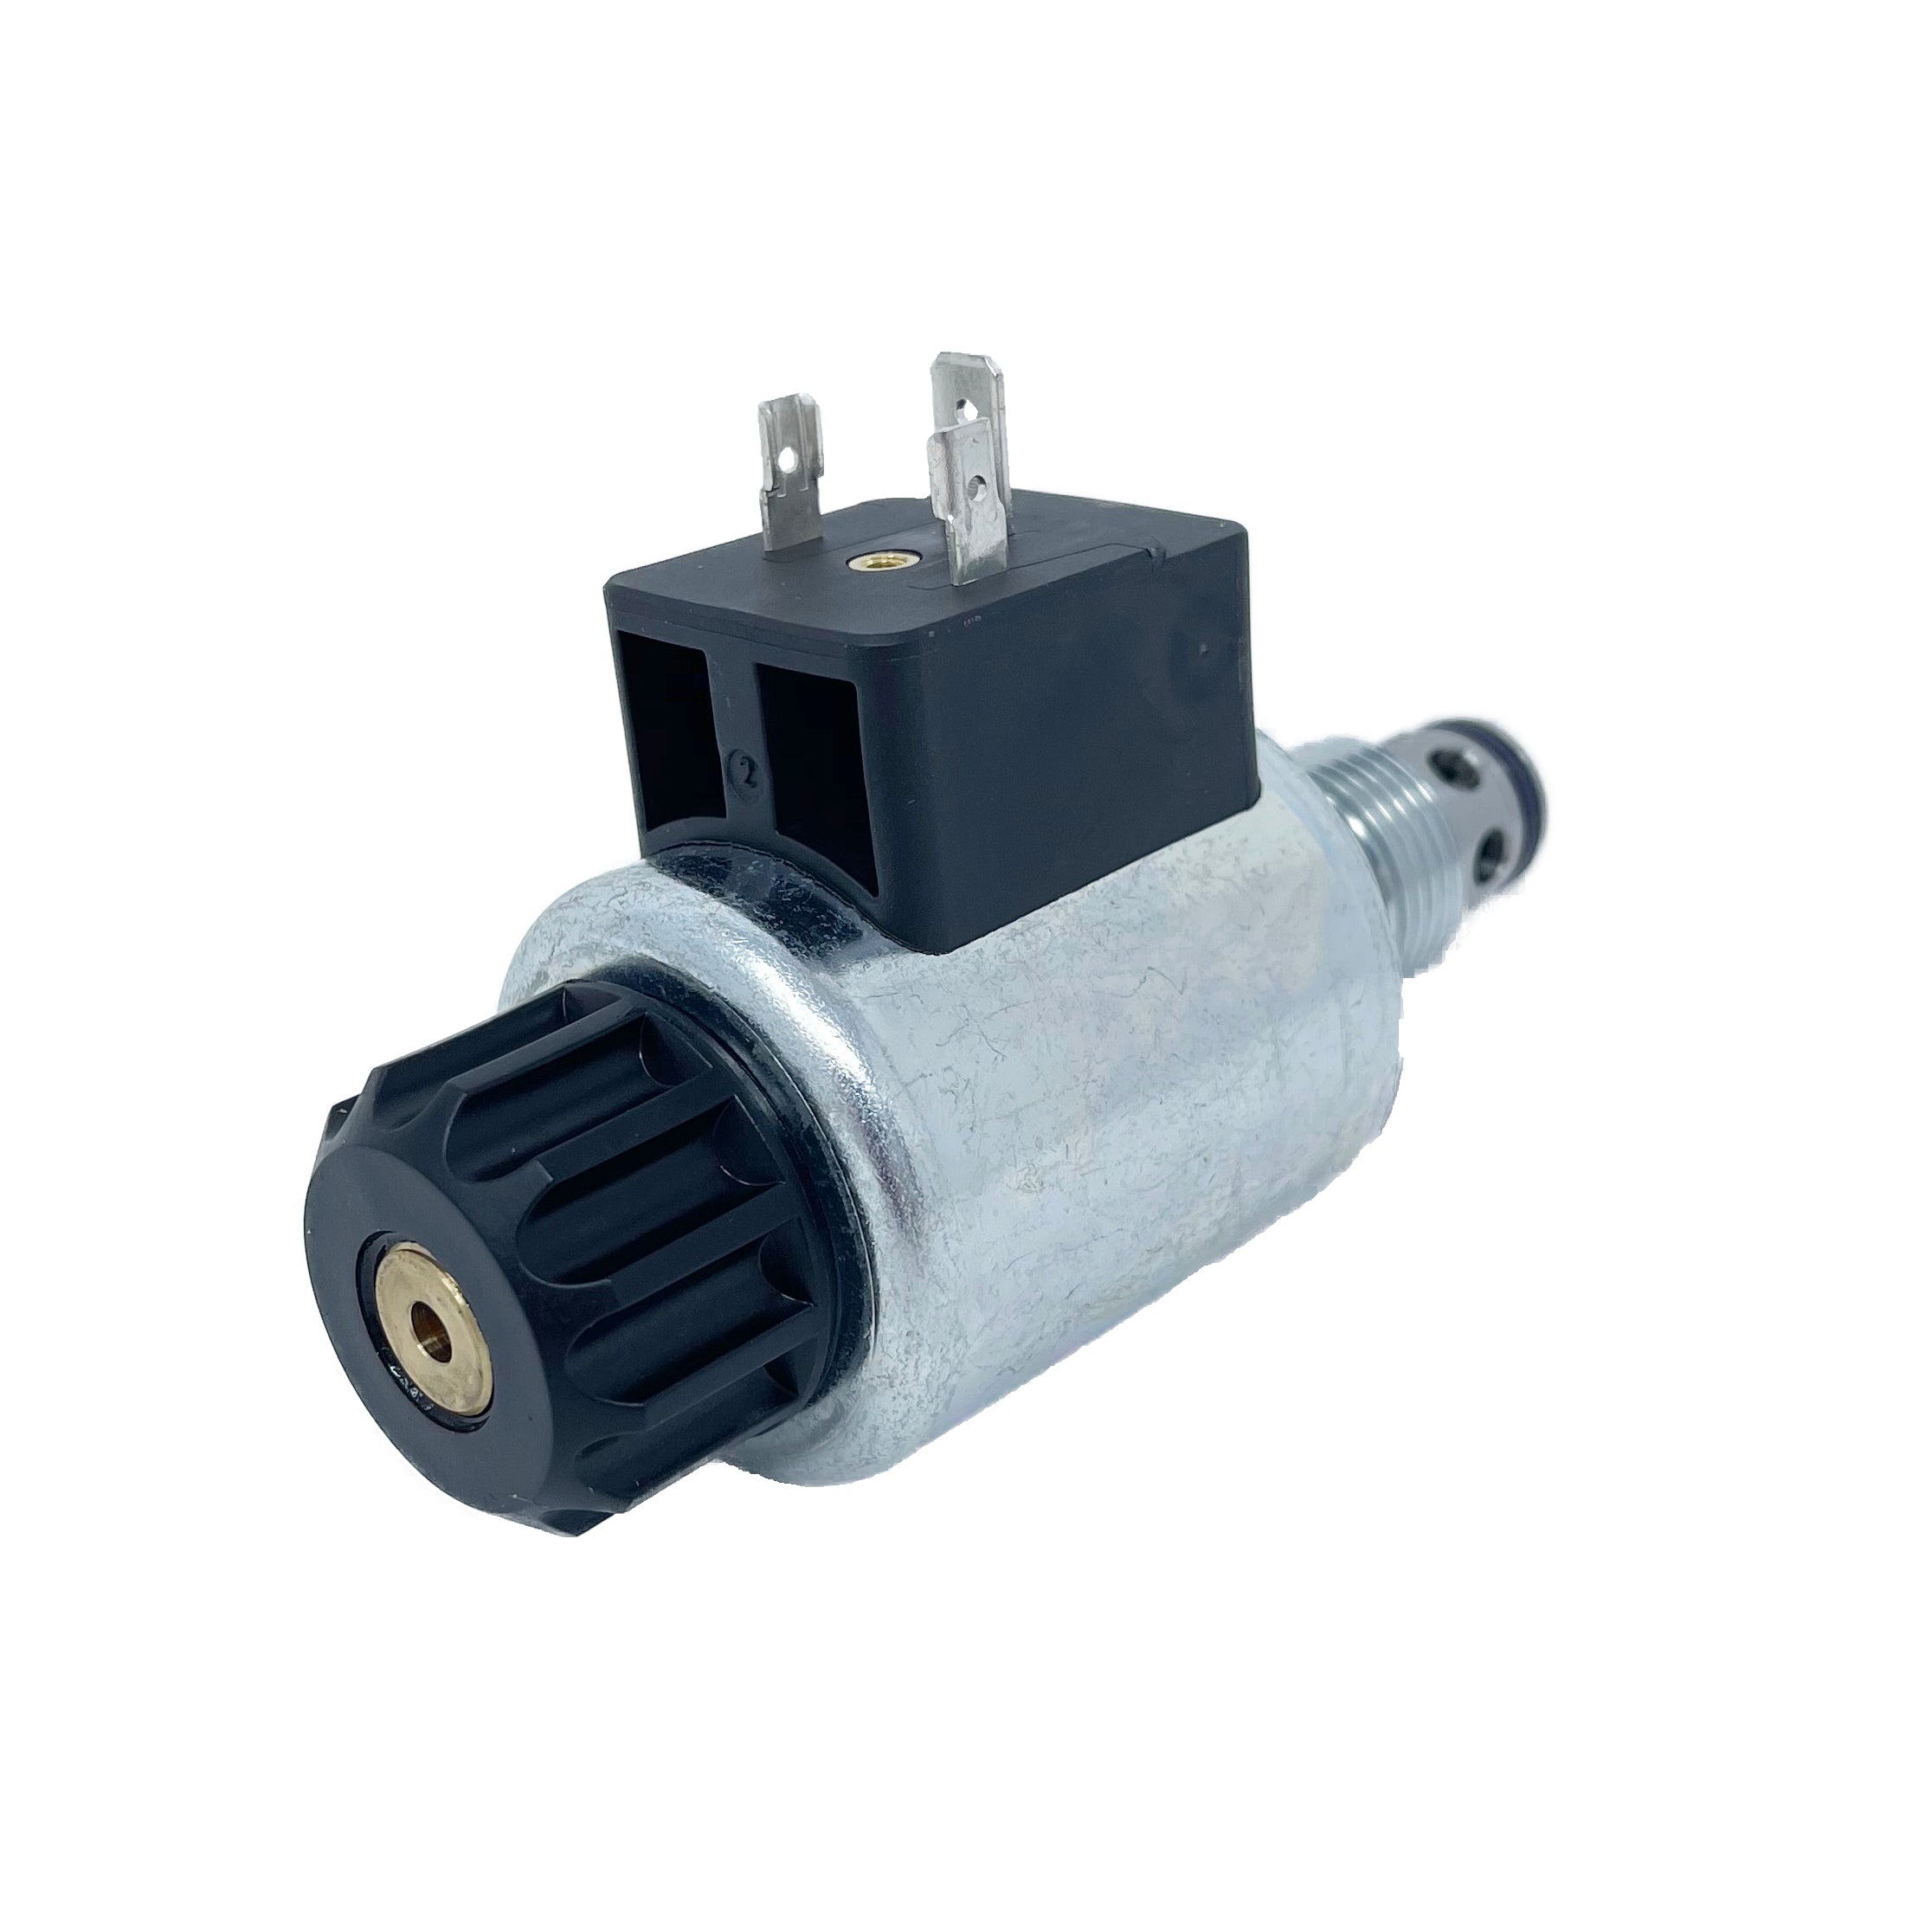 SD3E-B2/H2O2A120DIN : Argo DCV, 16GPM, 5100psi, 2P2W, C-10-2, 120 VAC DIN, Flow 1 to 2 Neutral